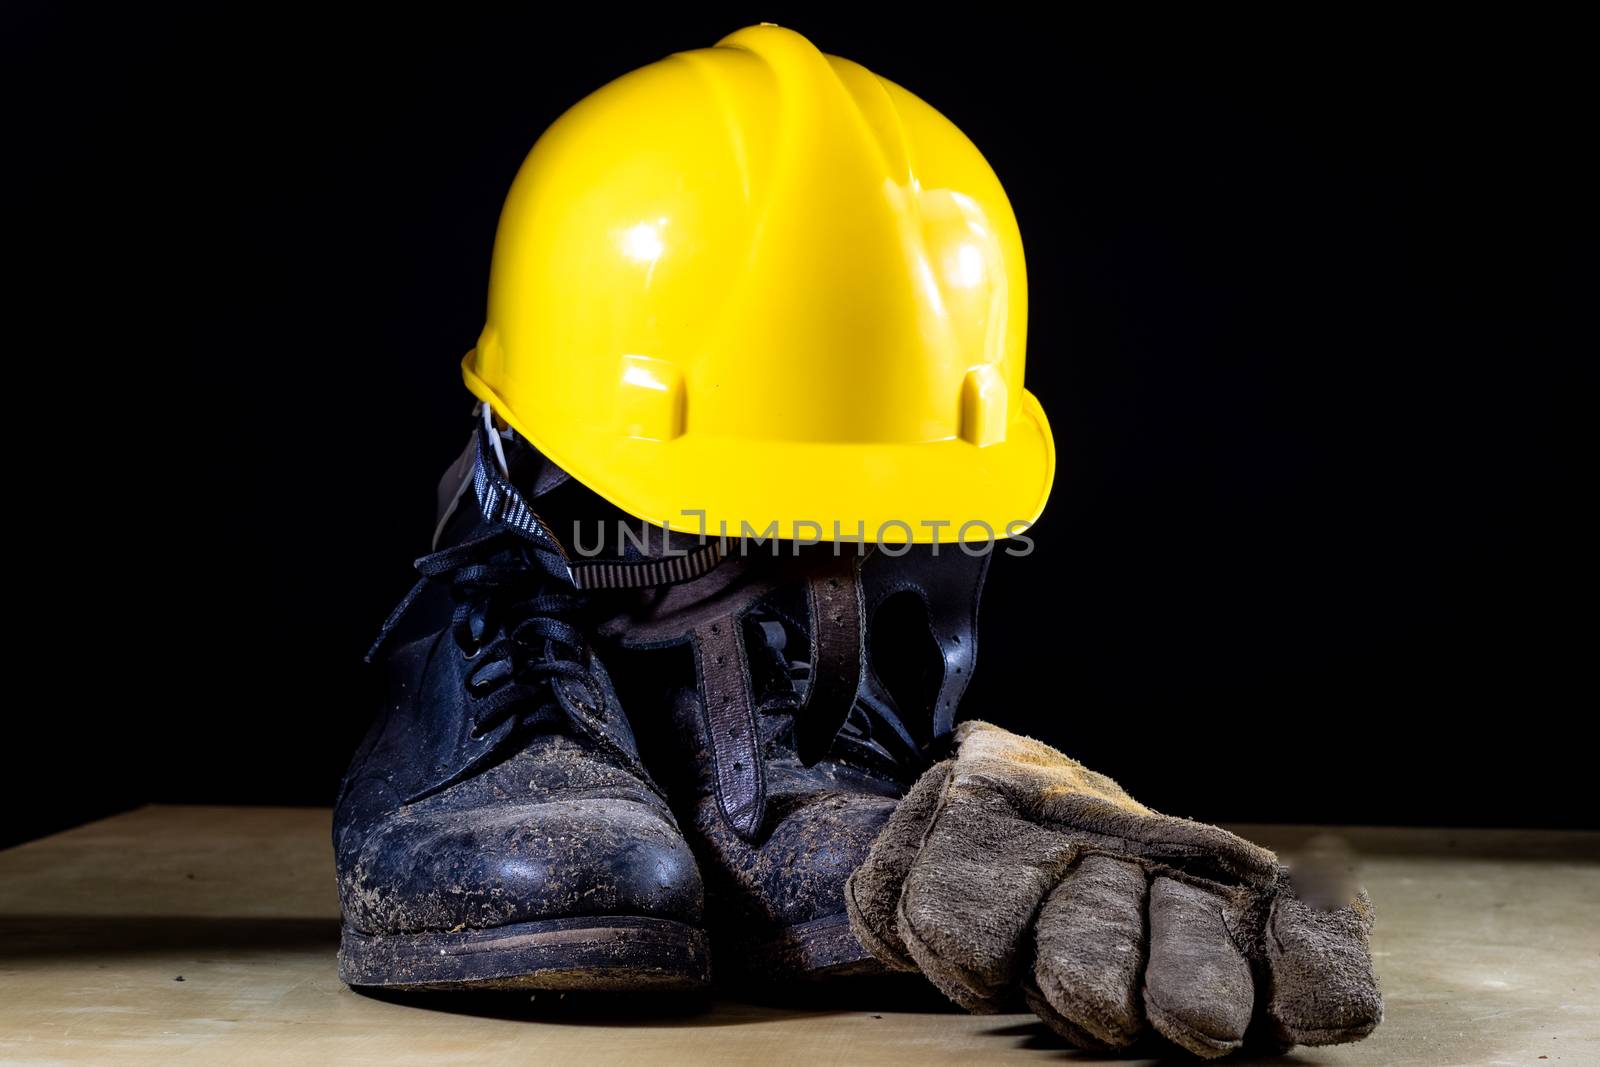 Muddy working boots with helmet and gloves. Accessories for the  by wytrazek